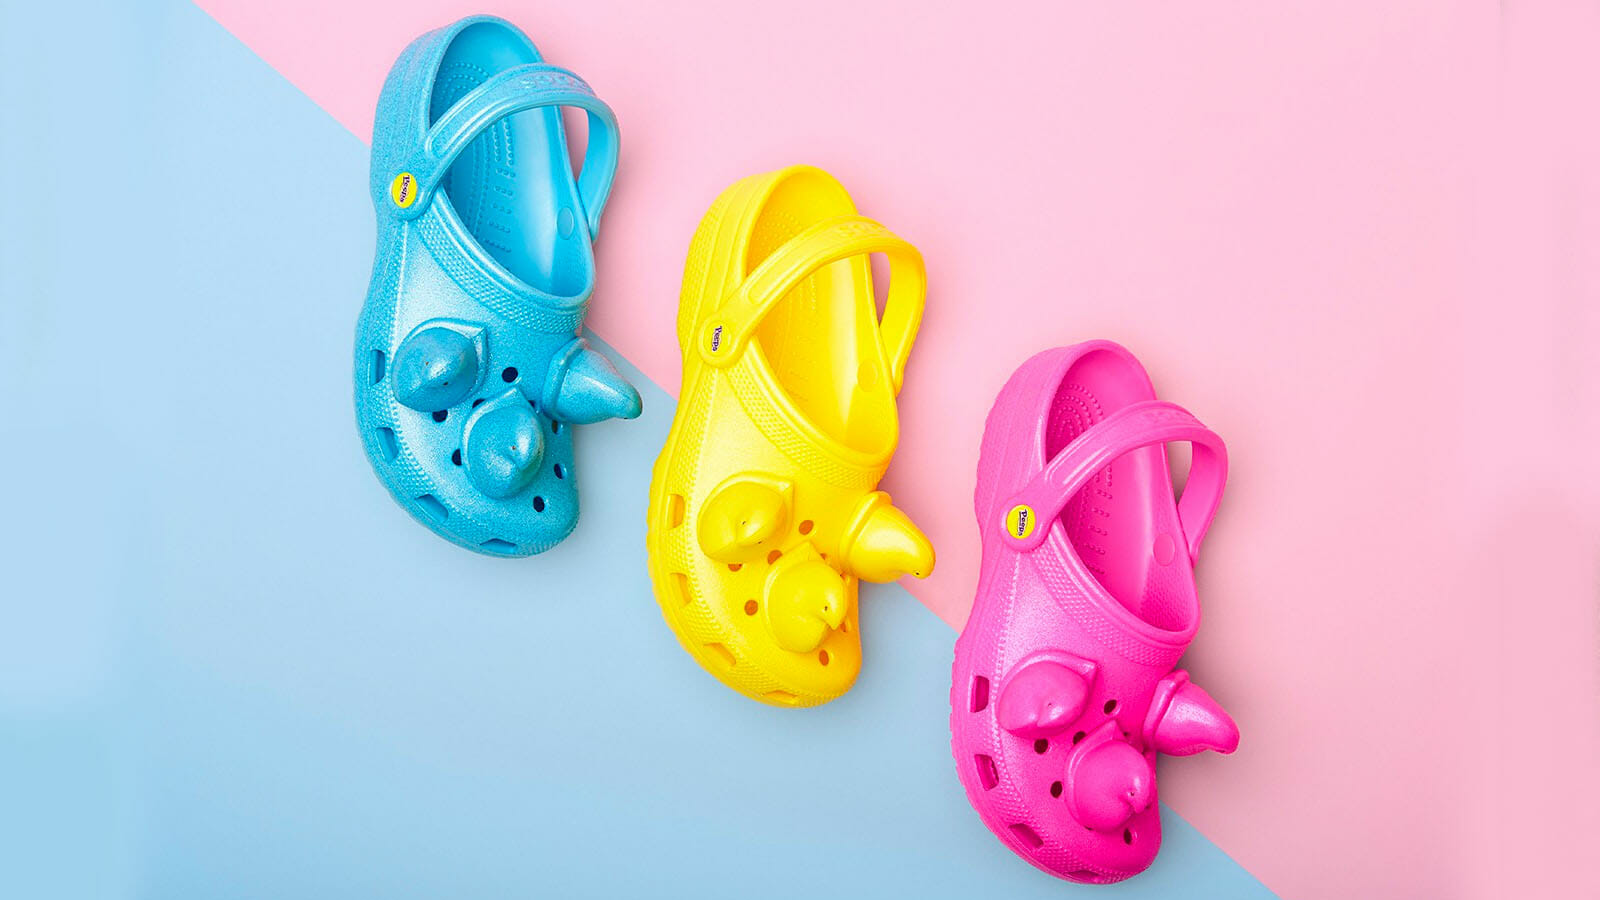 Prep for Spring With the Easter-Ready PEEPS x Crocs Clog | The Sole ...